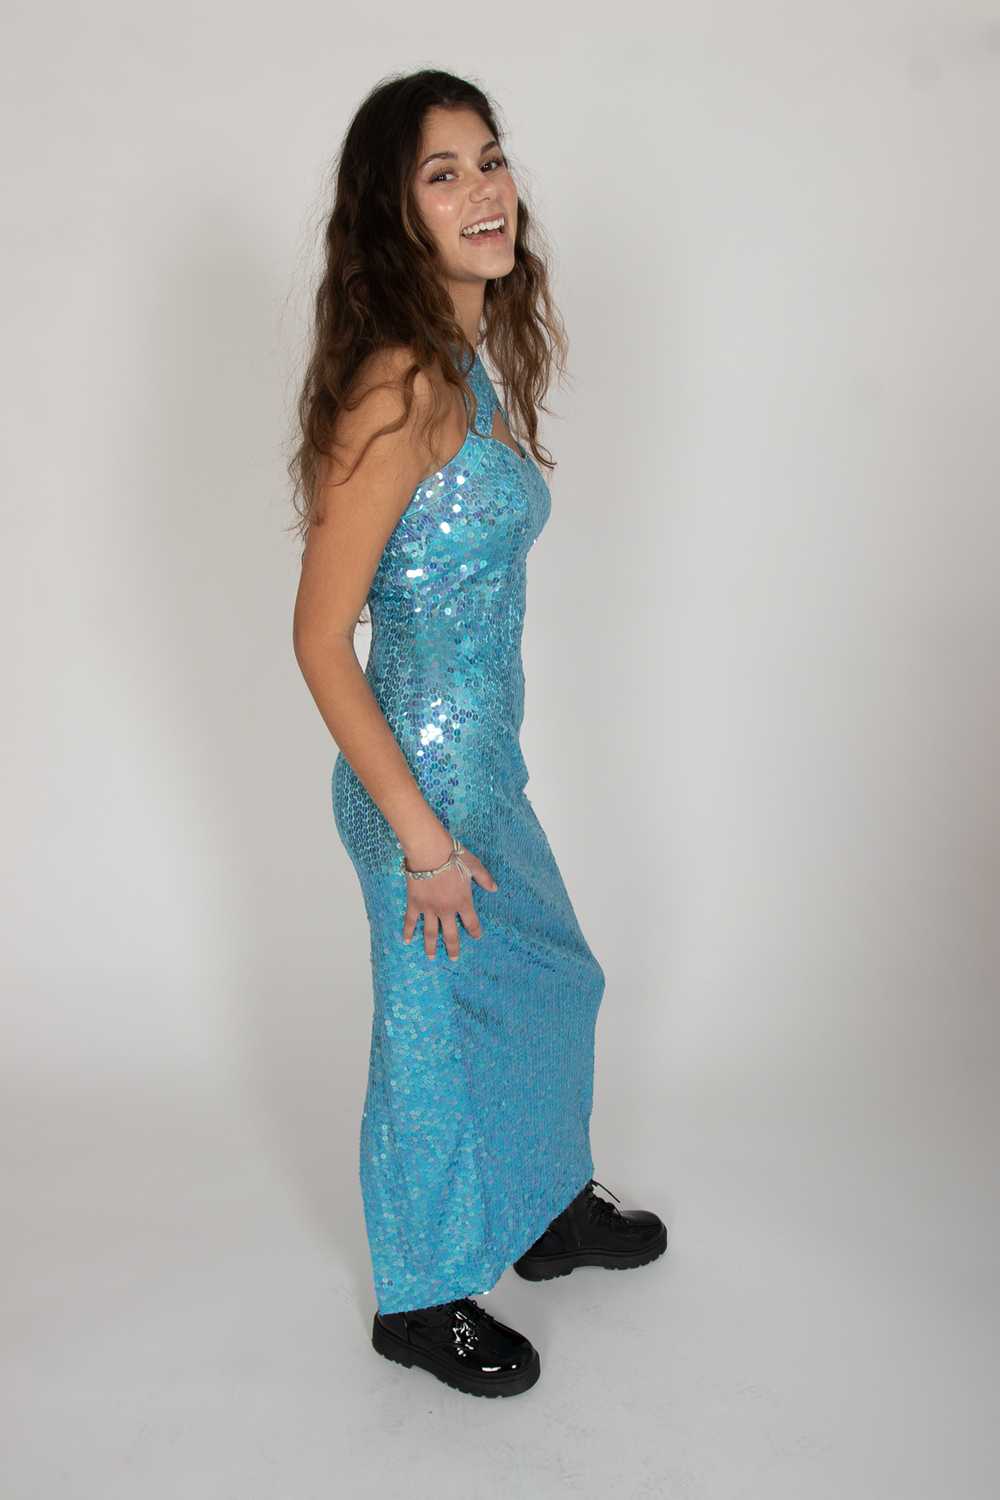 Vintage Adrianna Papell Blue Sequin Dress - image 3